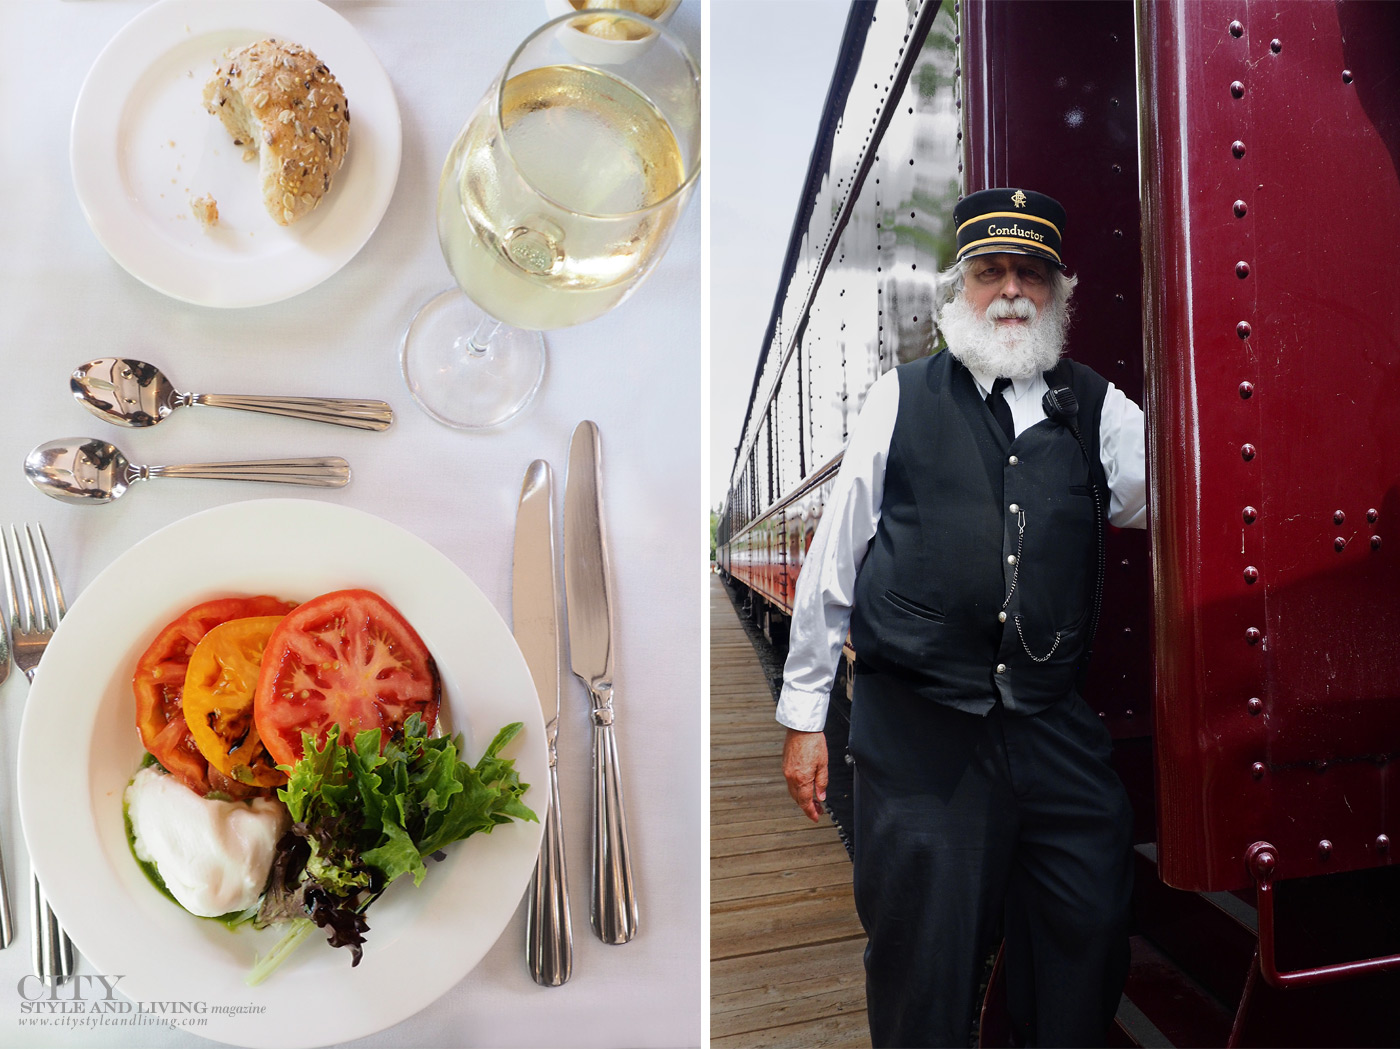 City Style and Living Magazine Travel Epic Train journeys in southern Alberta Heritage Park tomato salad and conductor 